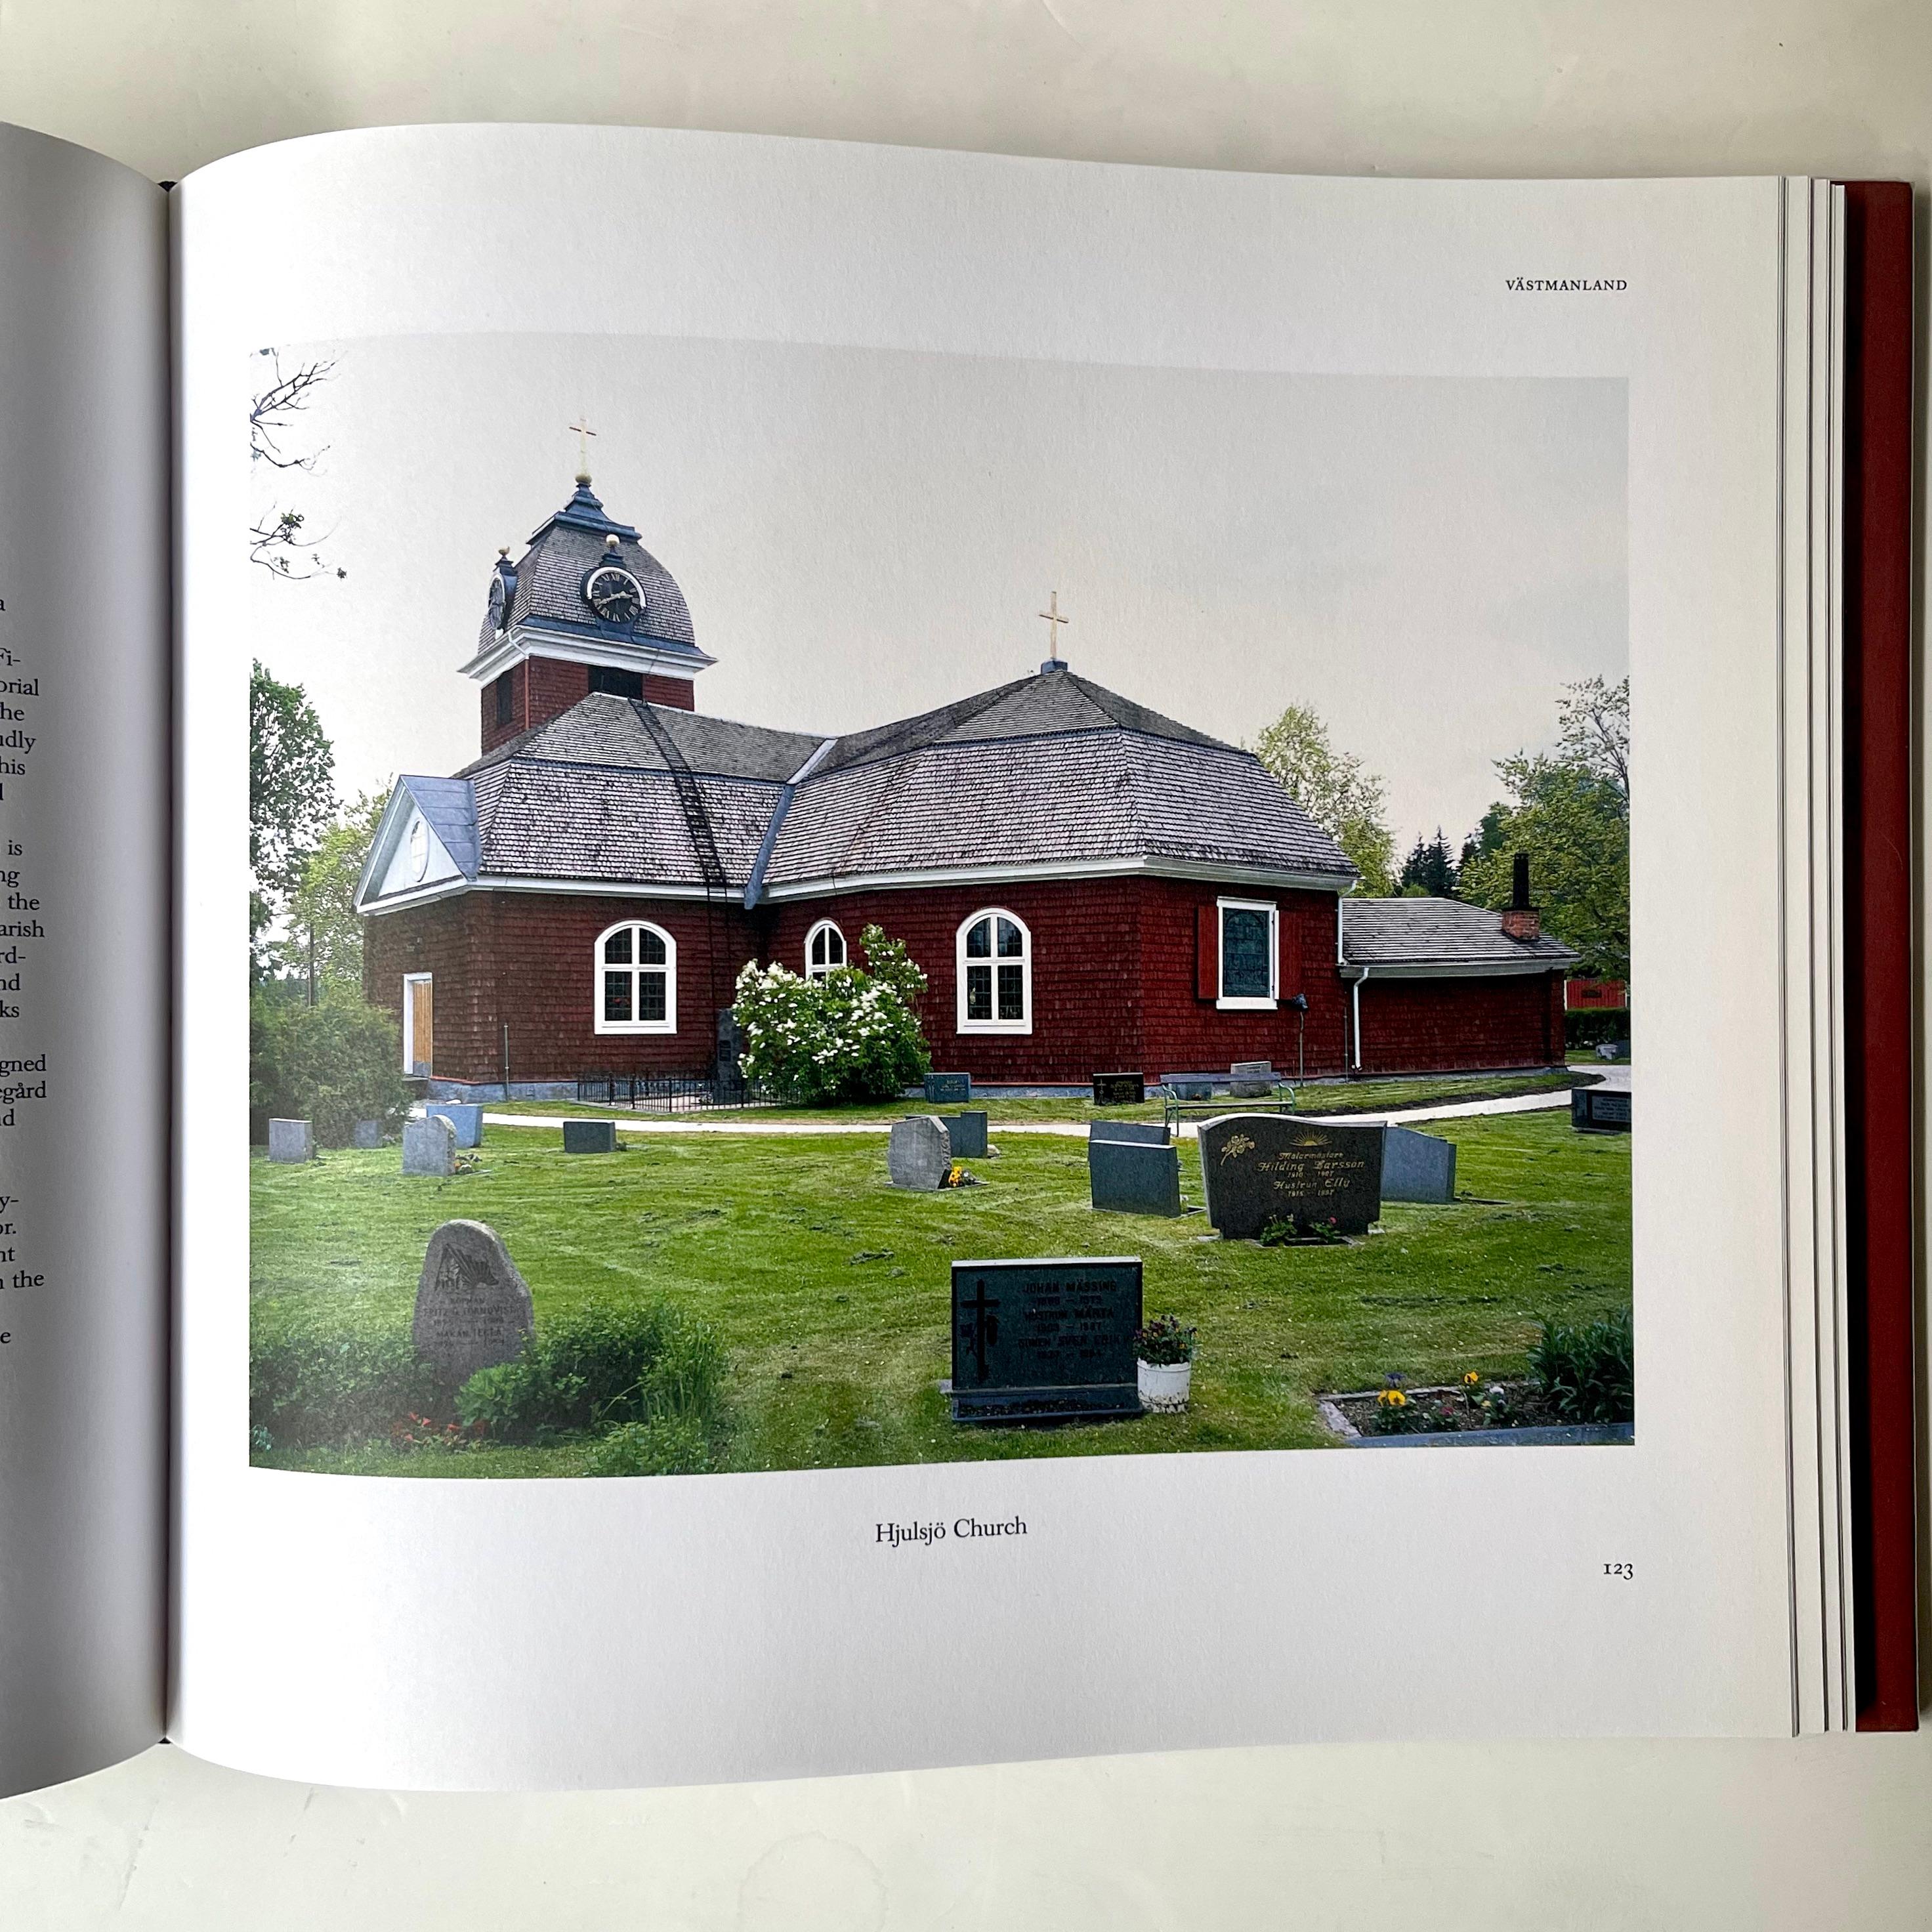 Red painted wooden houses have long occupied a special standing in 
The Red Houses - Margareta Kjellin 1st Edition 2005

Swedish architectural tradition and have done much to shape the image of Sweden's national building culture. Red houses and